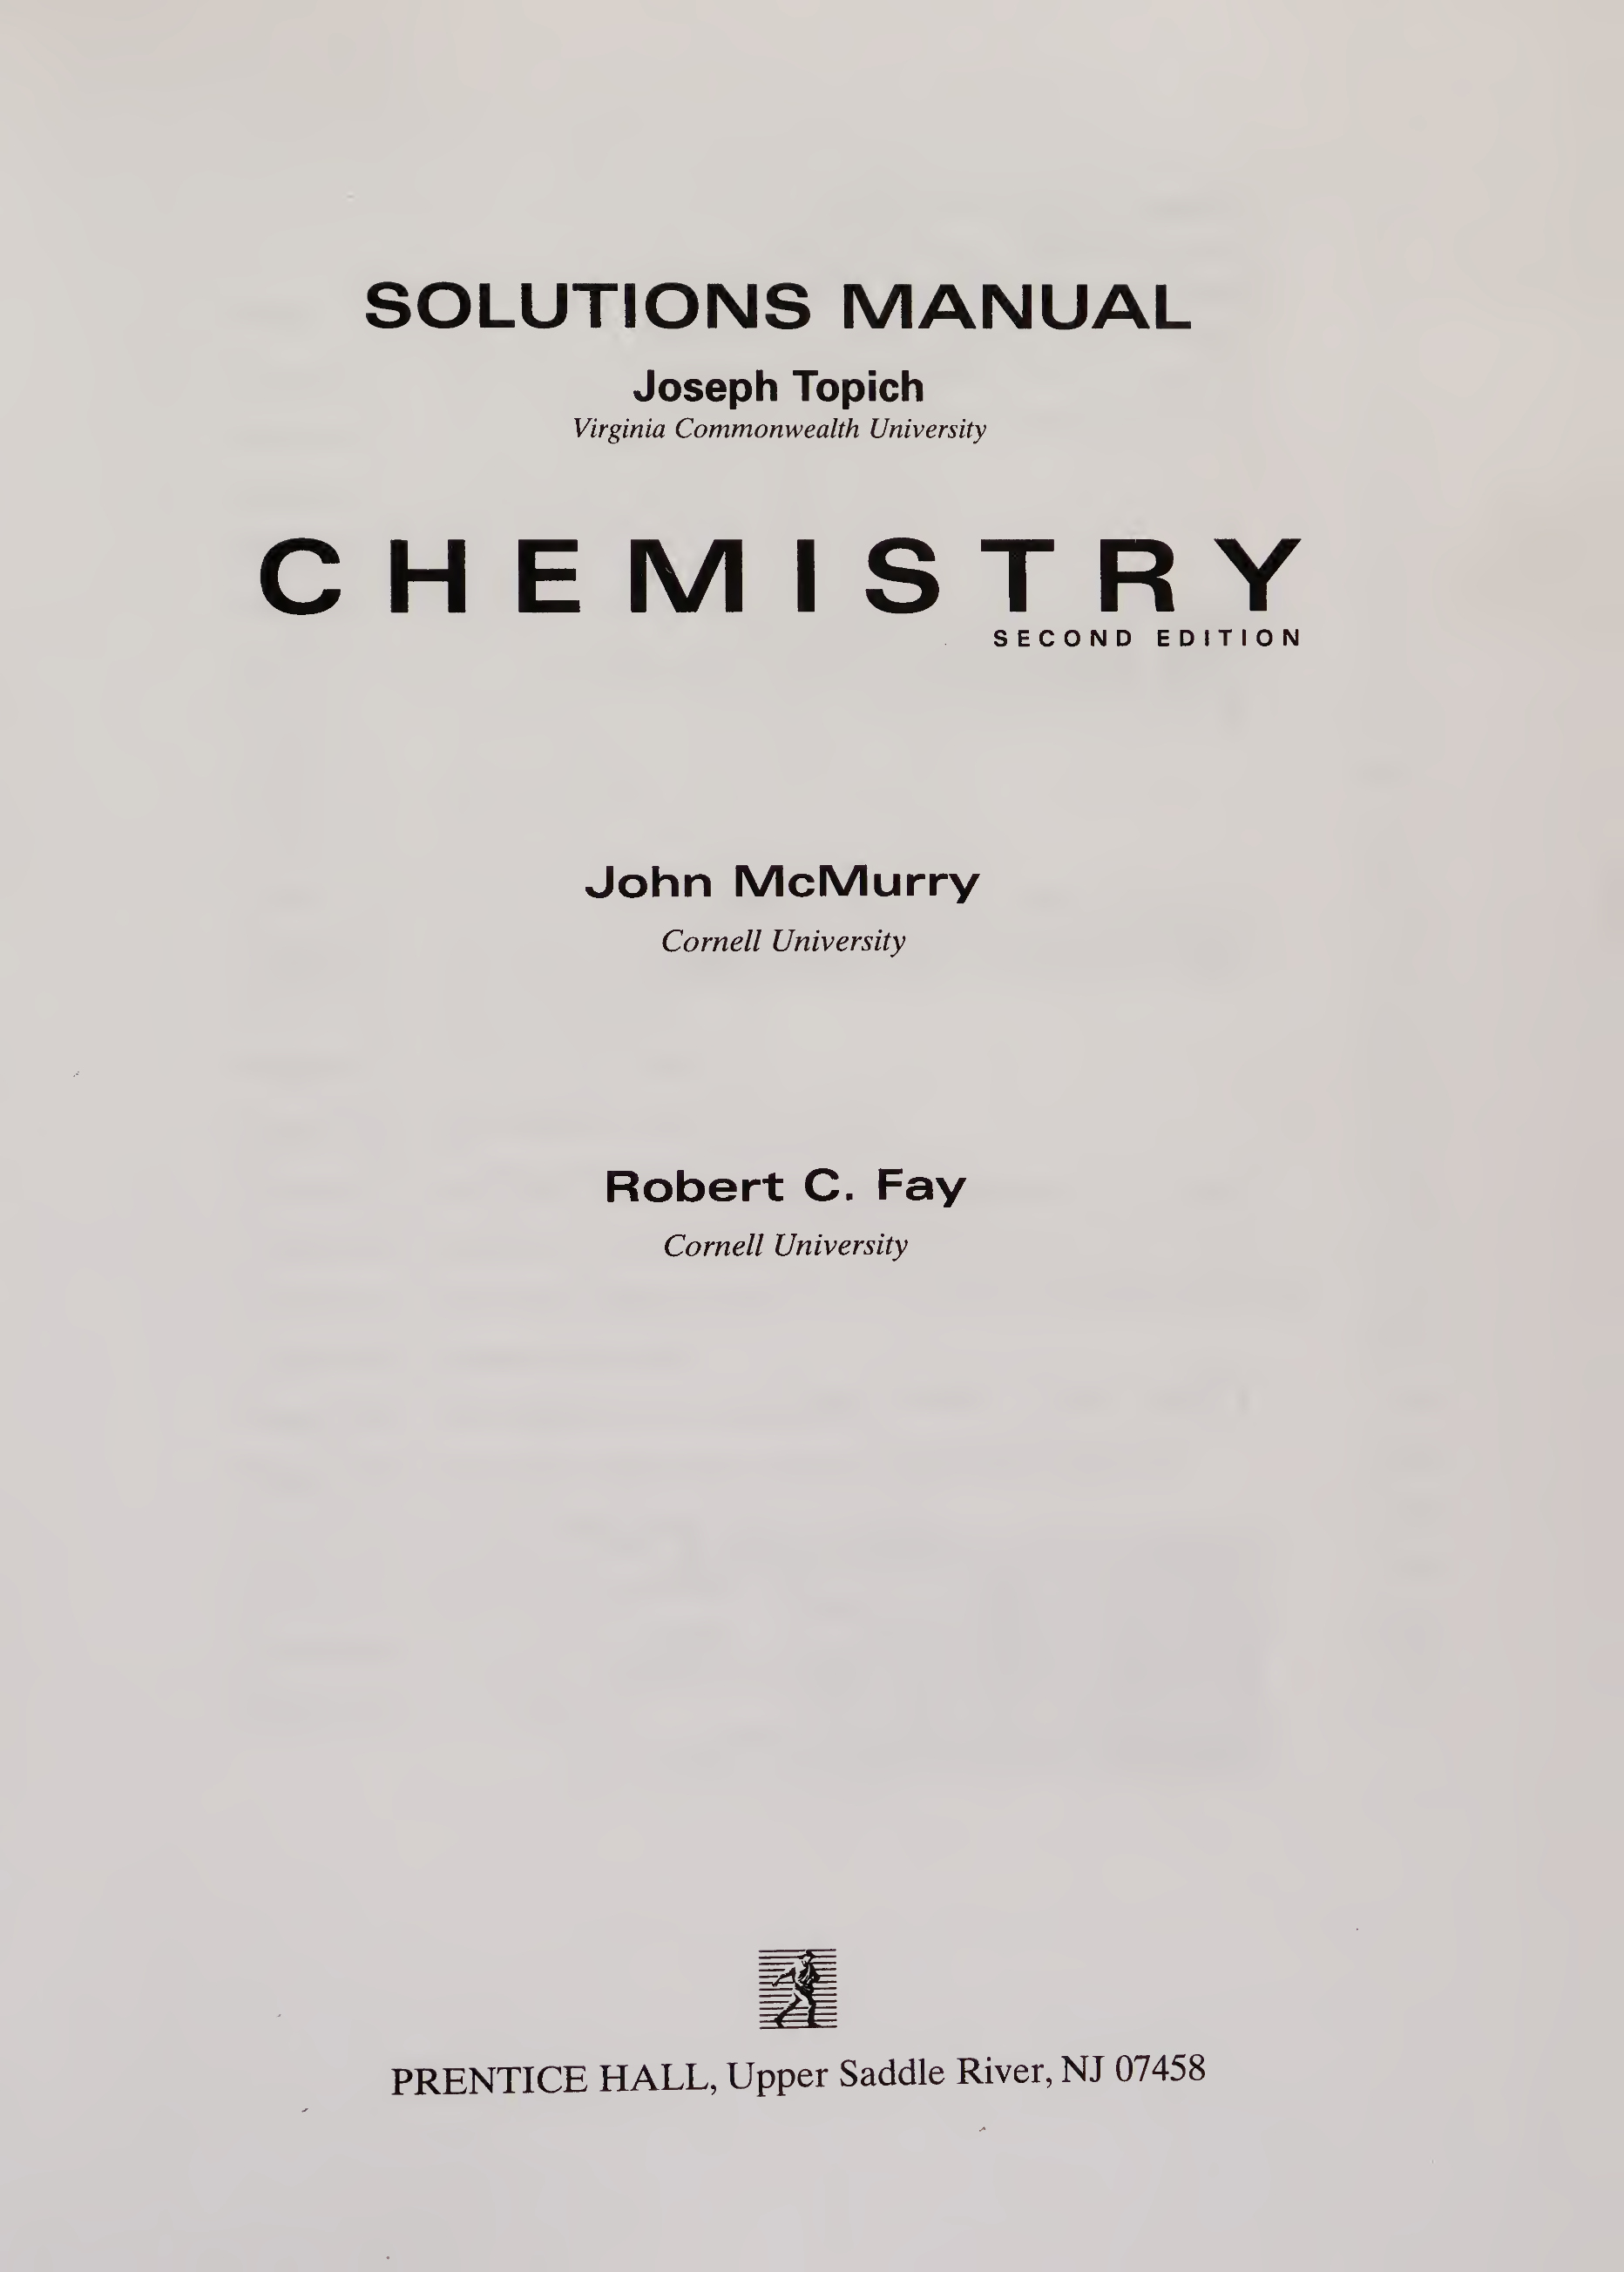 download free chemistry by McMurry & Fay 2nd edition solution manual and answers eBook in pdf format | Gioumeh